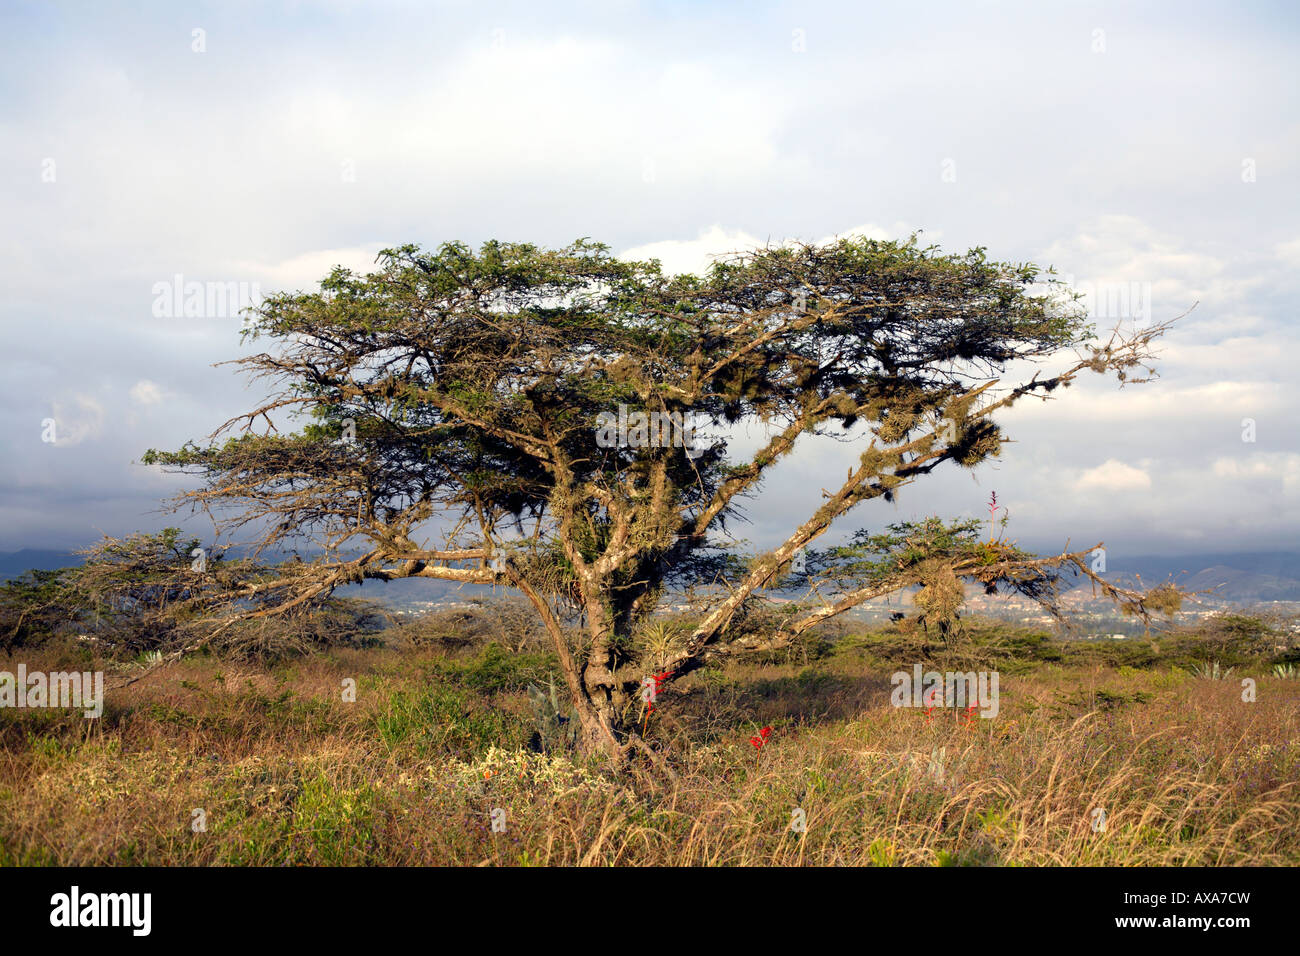 Lone Acacia macracantha tree in grassland with red bromeliad flower spikes Stock Photo